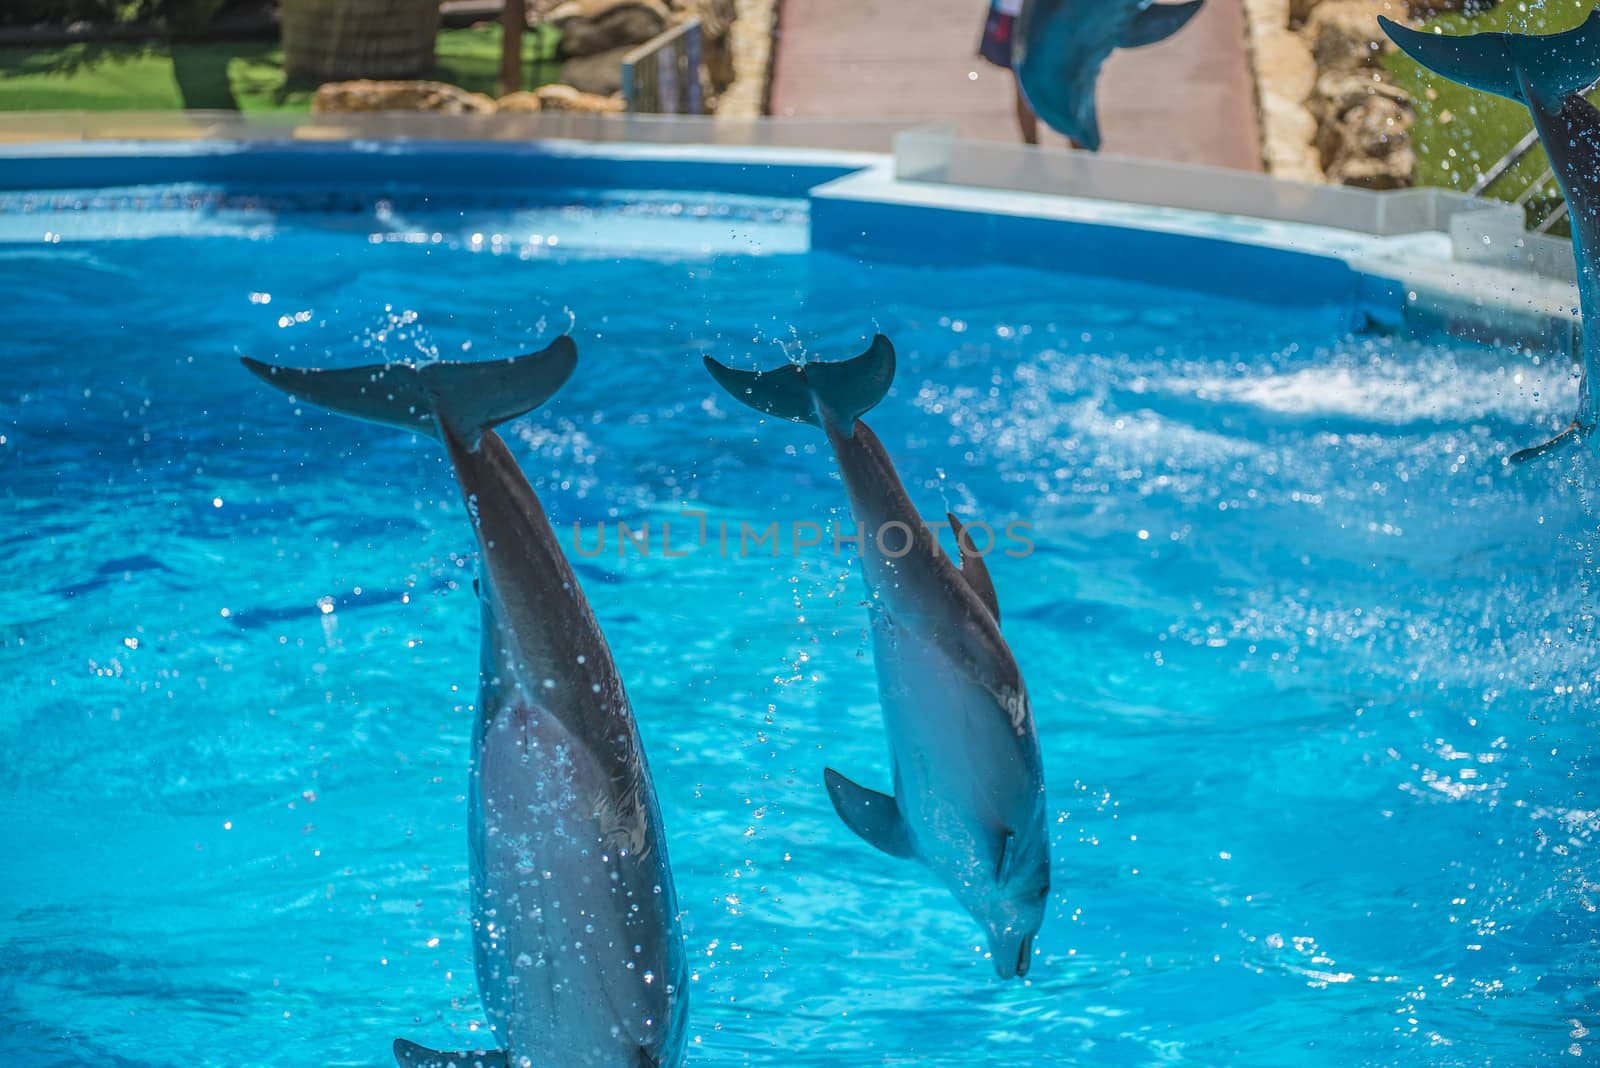 Dolphins jumping high in the air and it looks like they are flying. All the photos are shot July 25, 2013